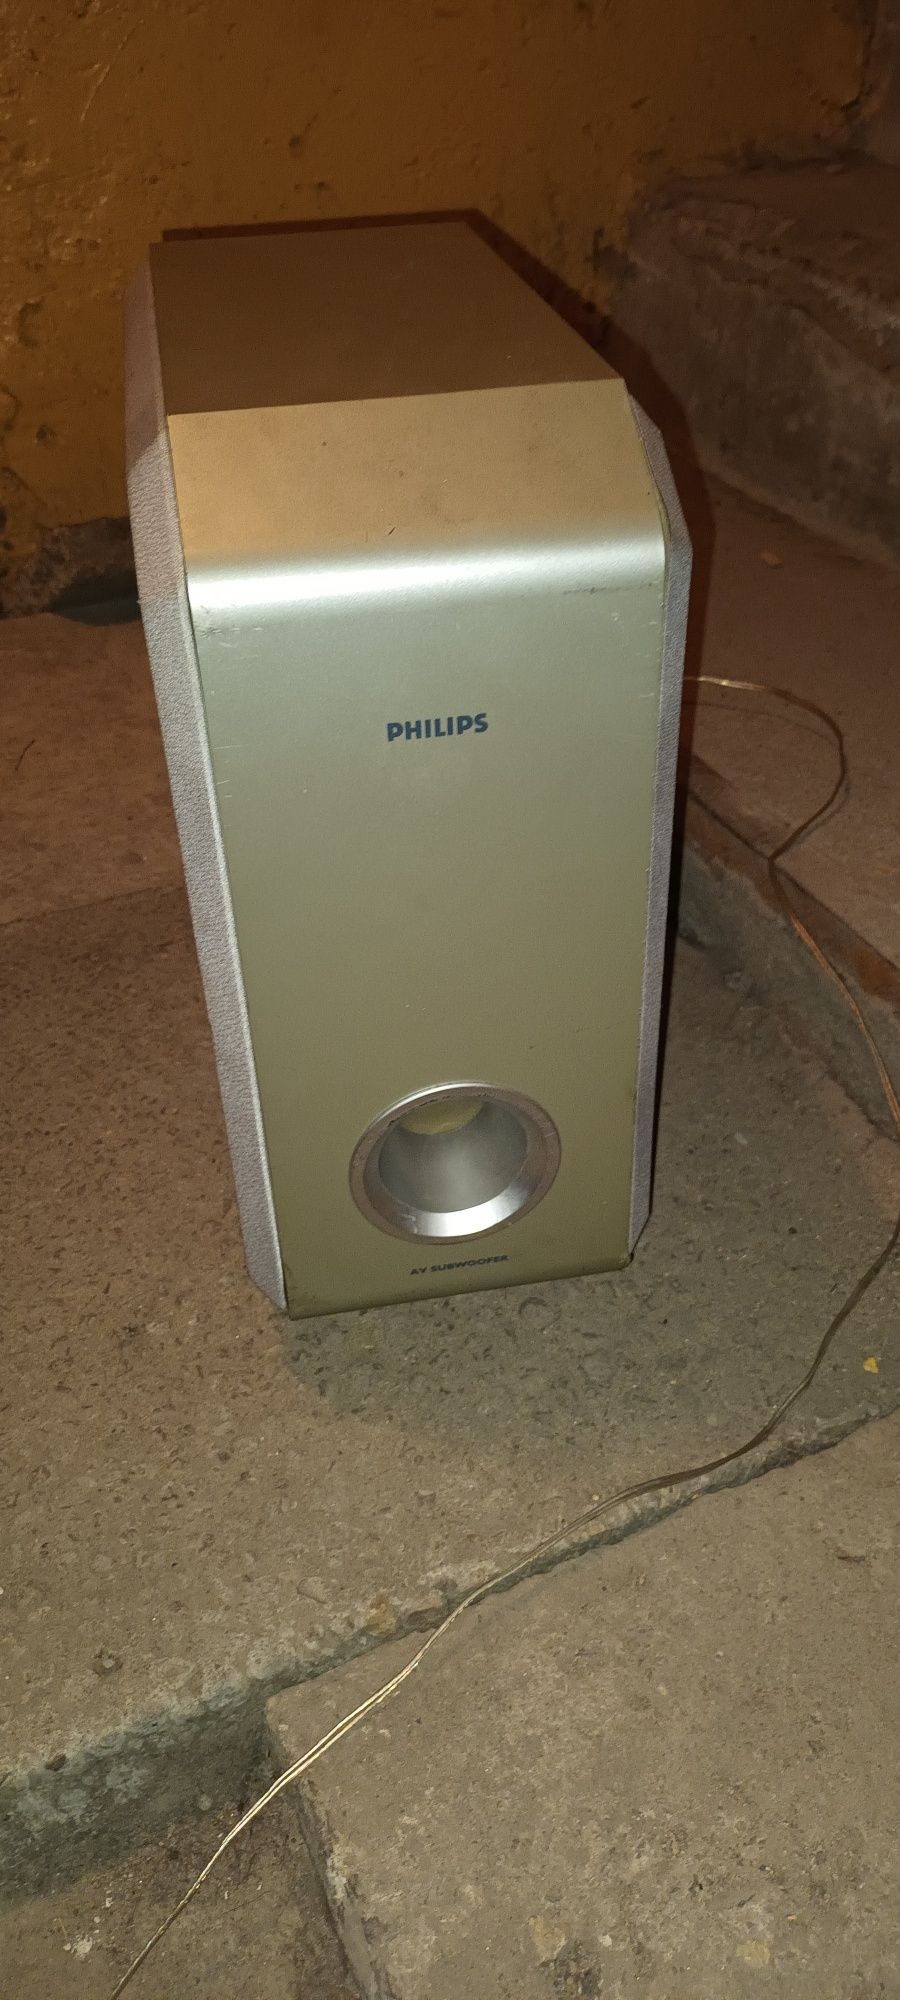 Subwoofer Philips sw 600